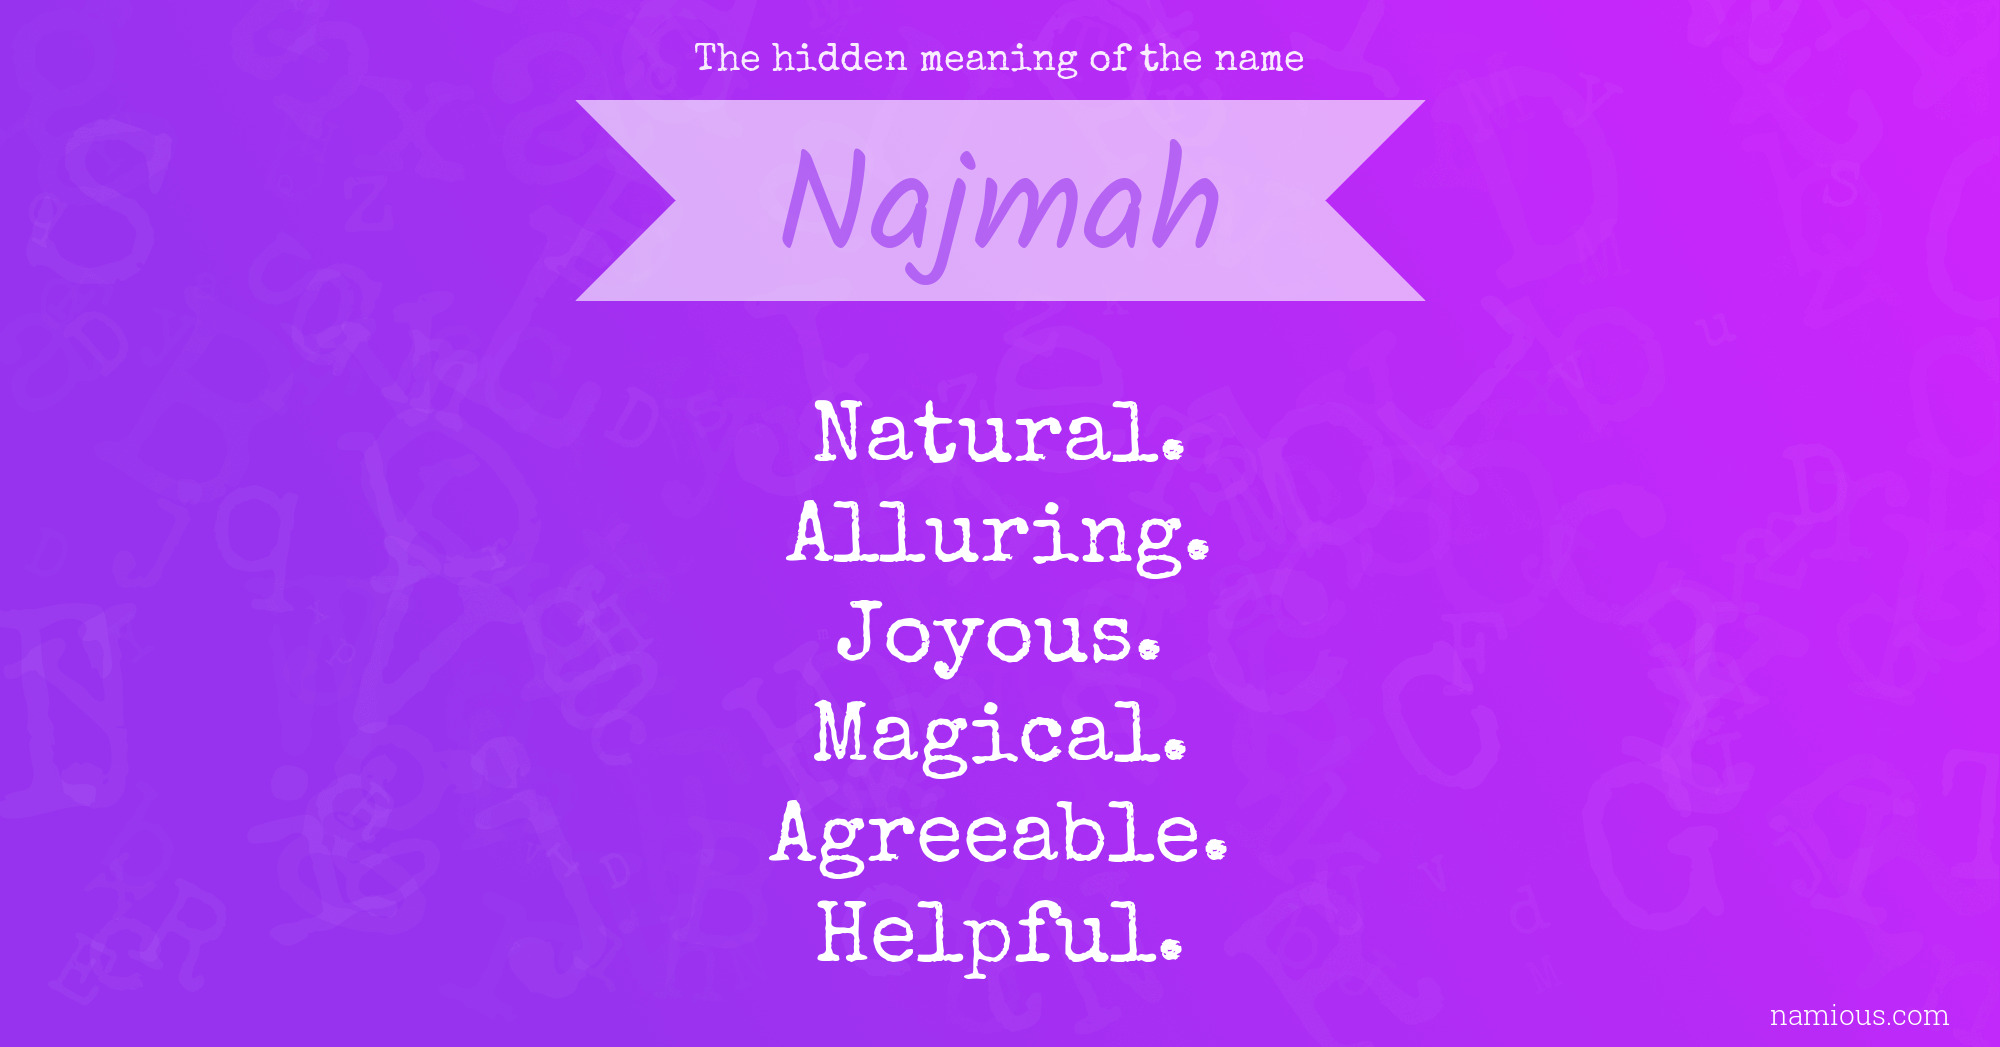 The hidden meaning of the name Najmah